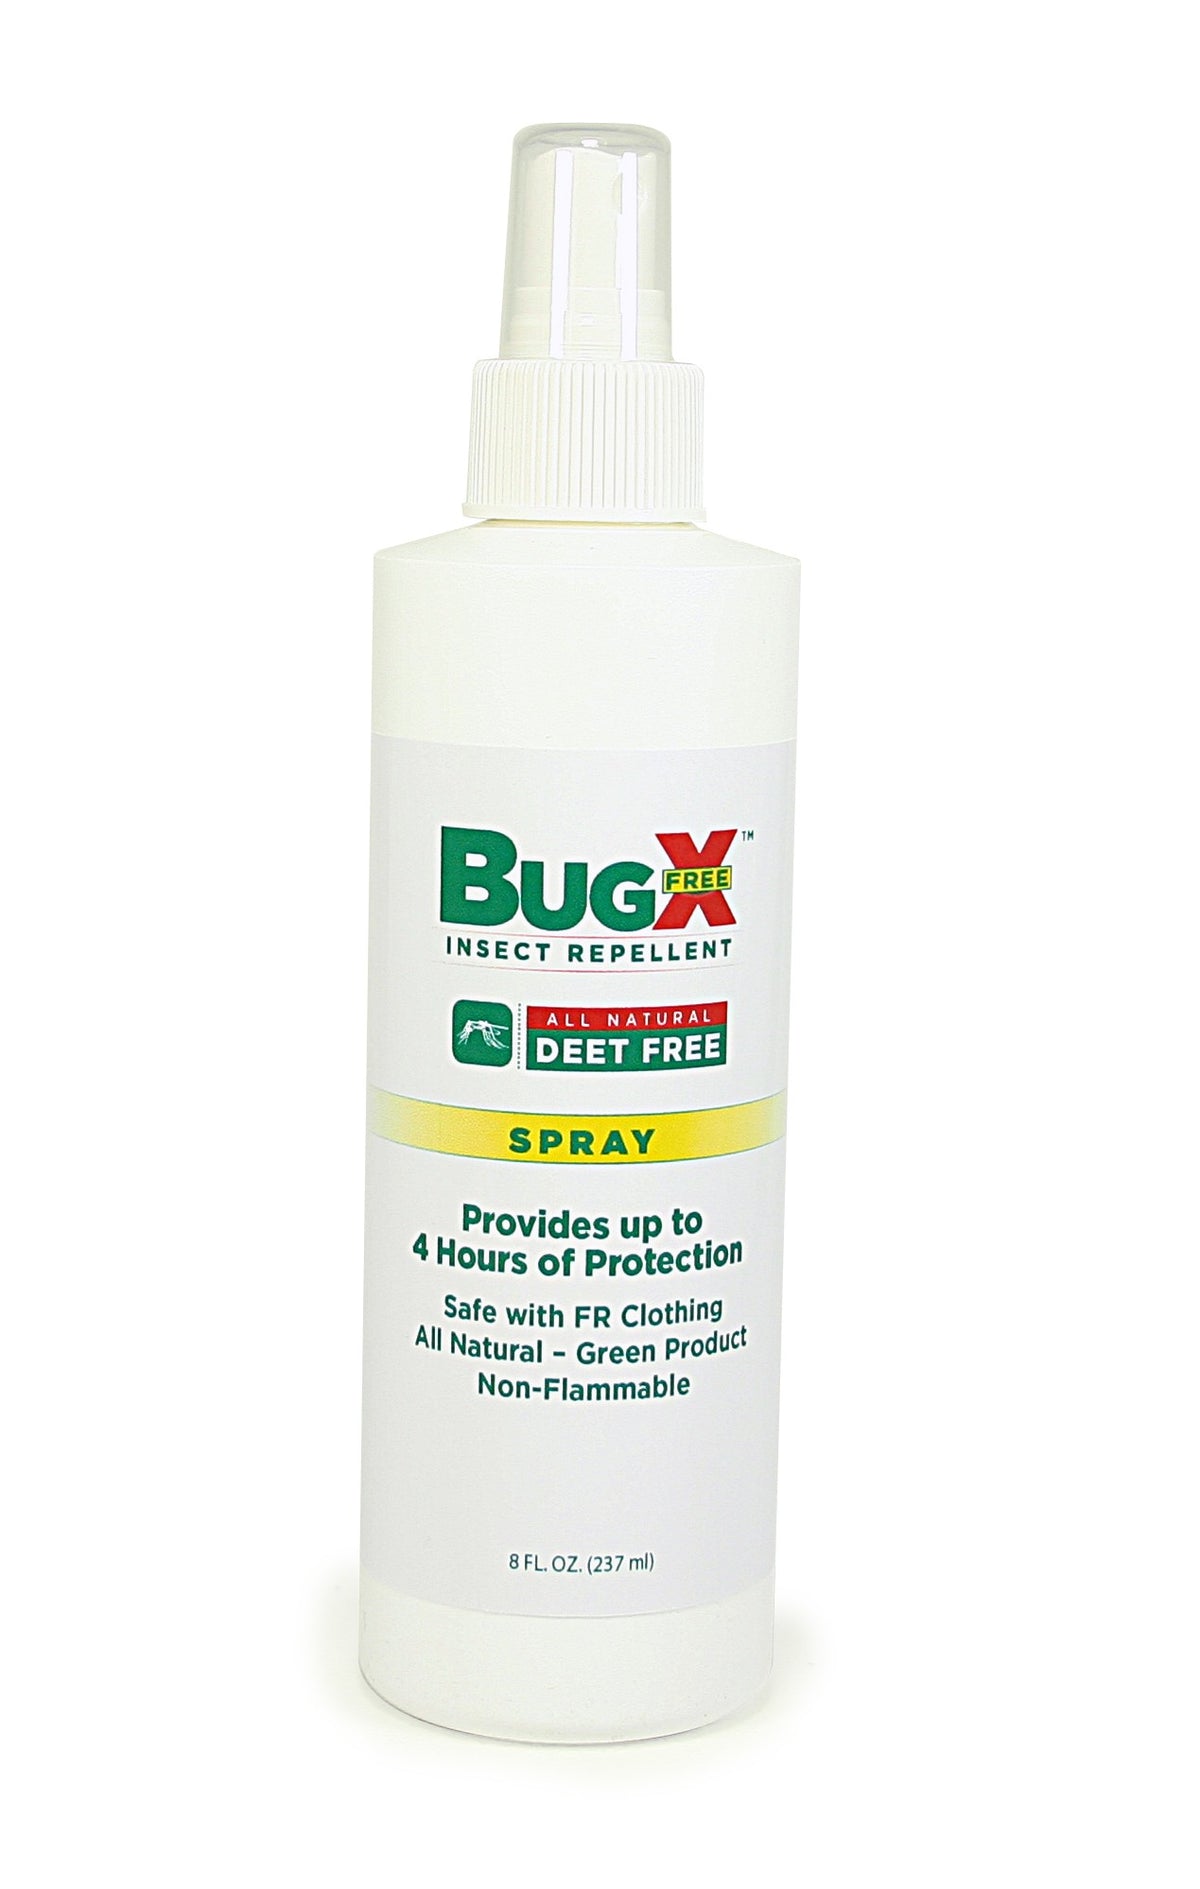 BugX DEET FREE Insect Repellent Spray, 8 Oz. Bottle, Case Of 12 - W-500-18-808